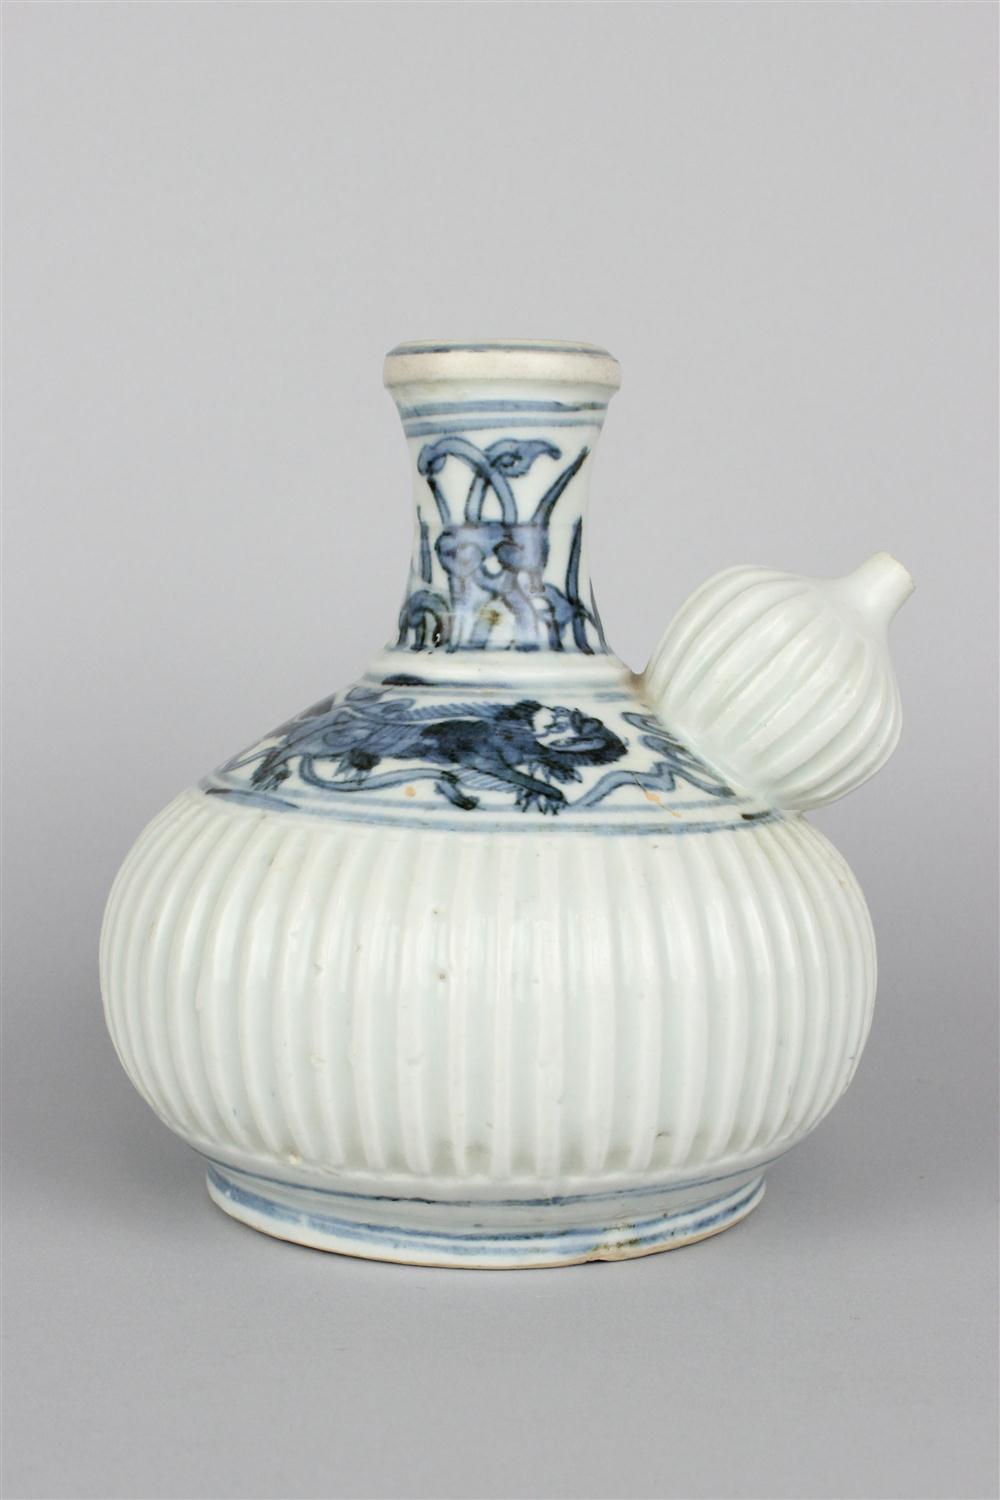 CHINESE BLUE AND WHITE KENDI WITH 146c47